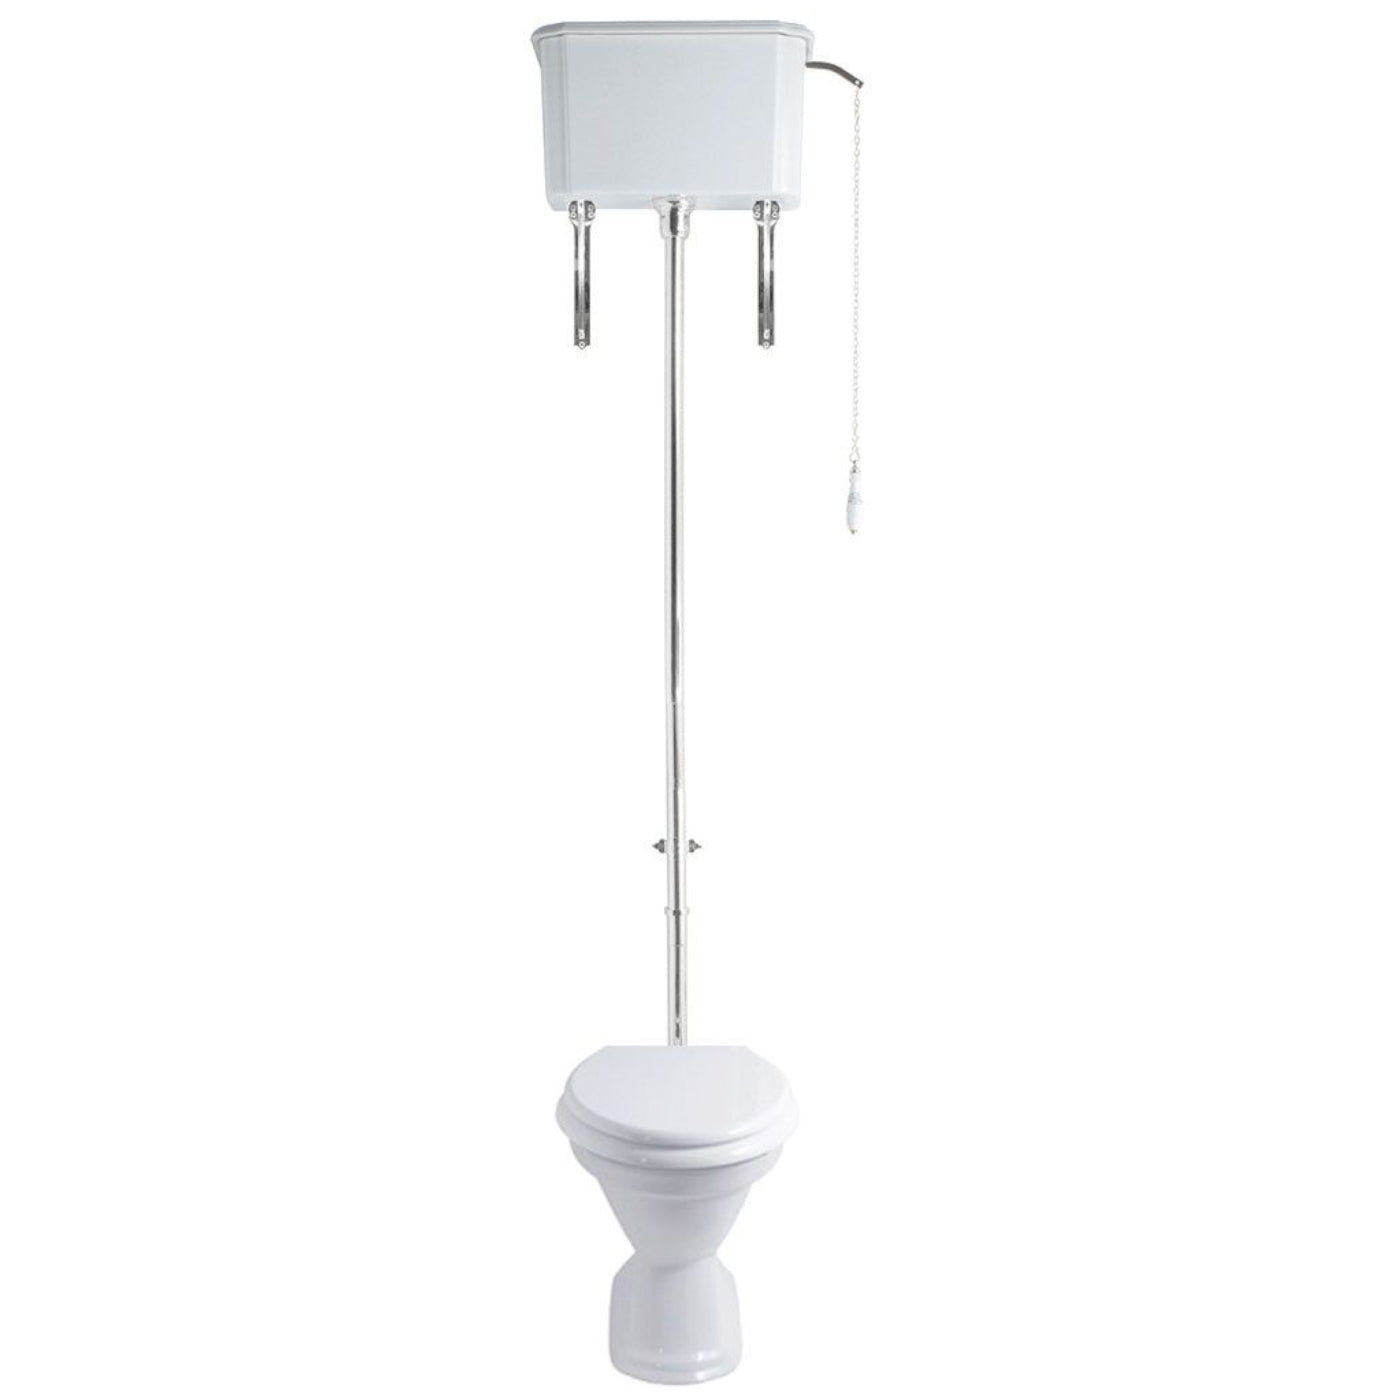 TURNER HASTINGS BIRMINGHAM CLOSE COUPLED TOILET WITH HIGH LEVEL CISTERN GLOSS WHITE